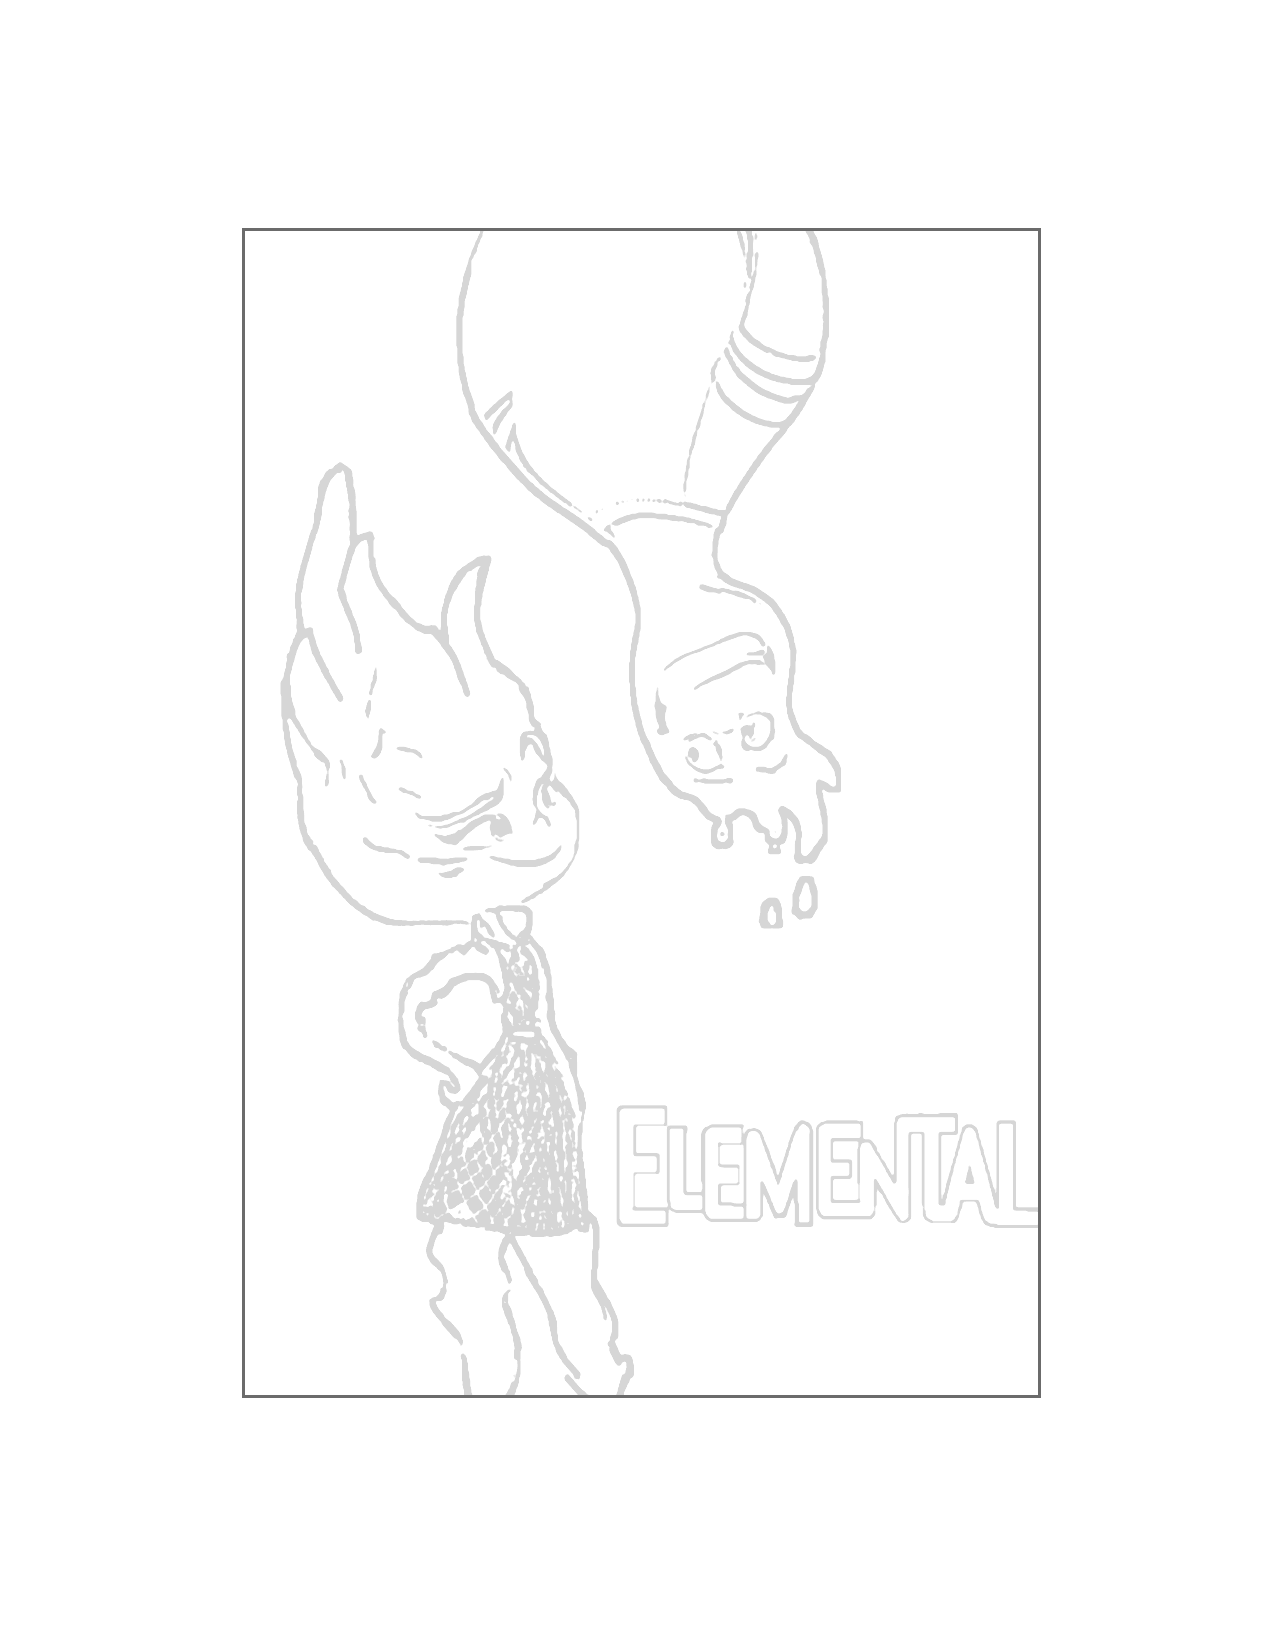 Cute Elemental Tracing Coloring Page